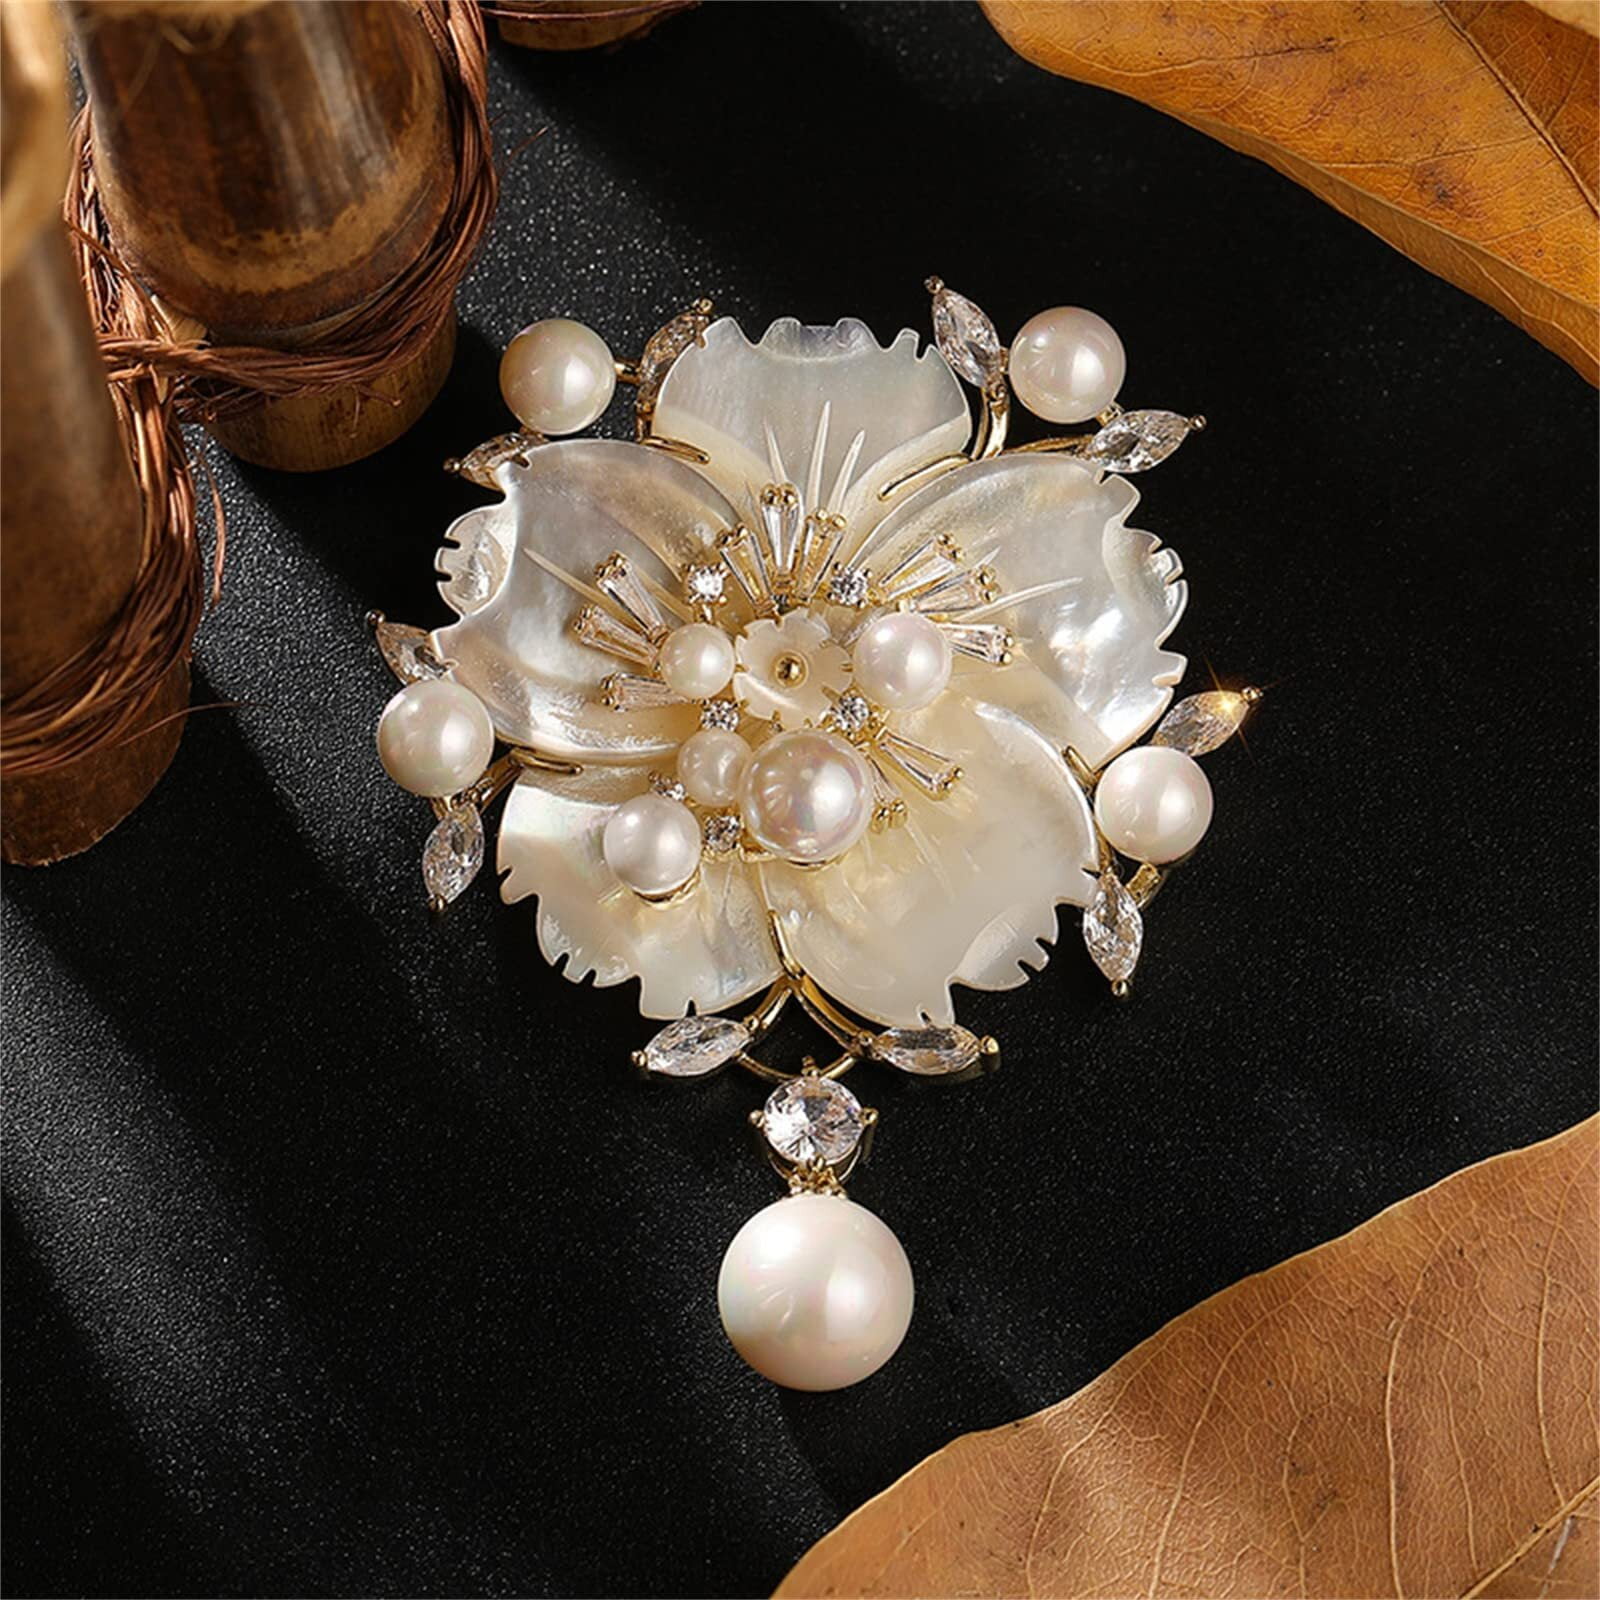 clberni Elegant Pearl Flower Designer Brooch Pins Broches Costume Jewelry for Women Fashion Christmas Gift, Women's, Size: 2.36 x 1.77, Gold